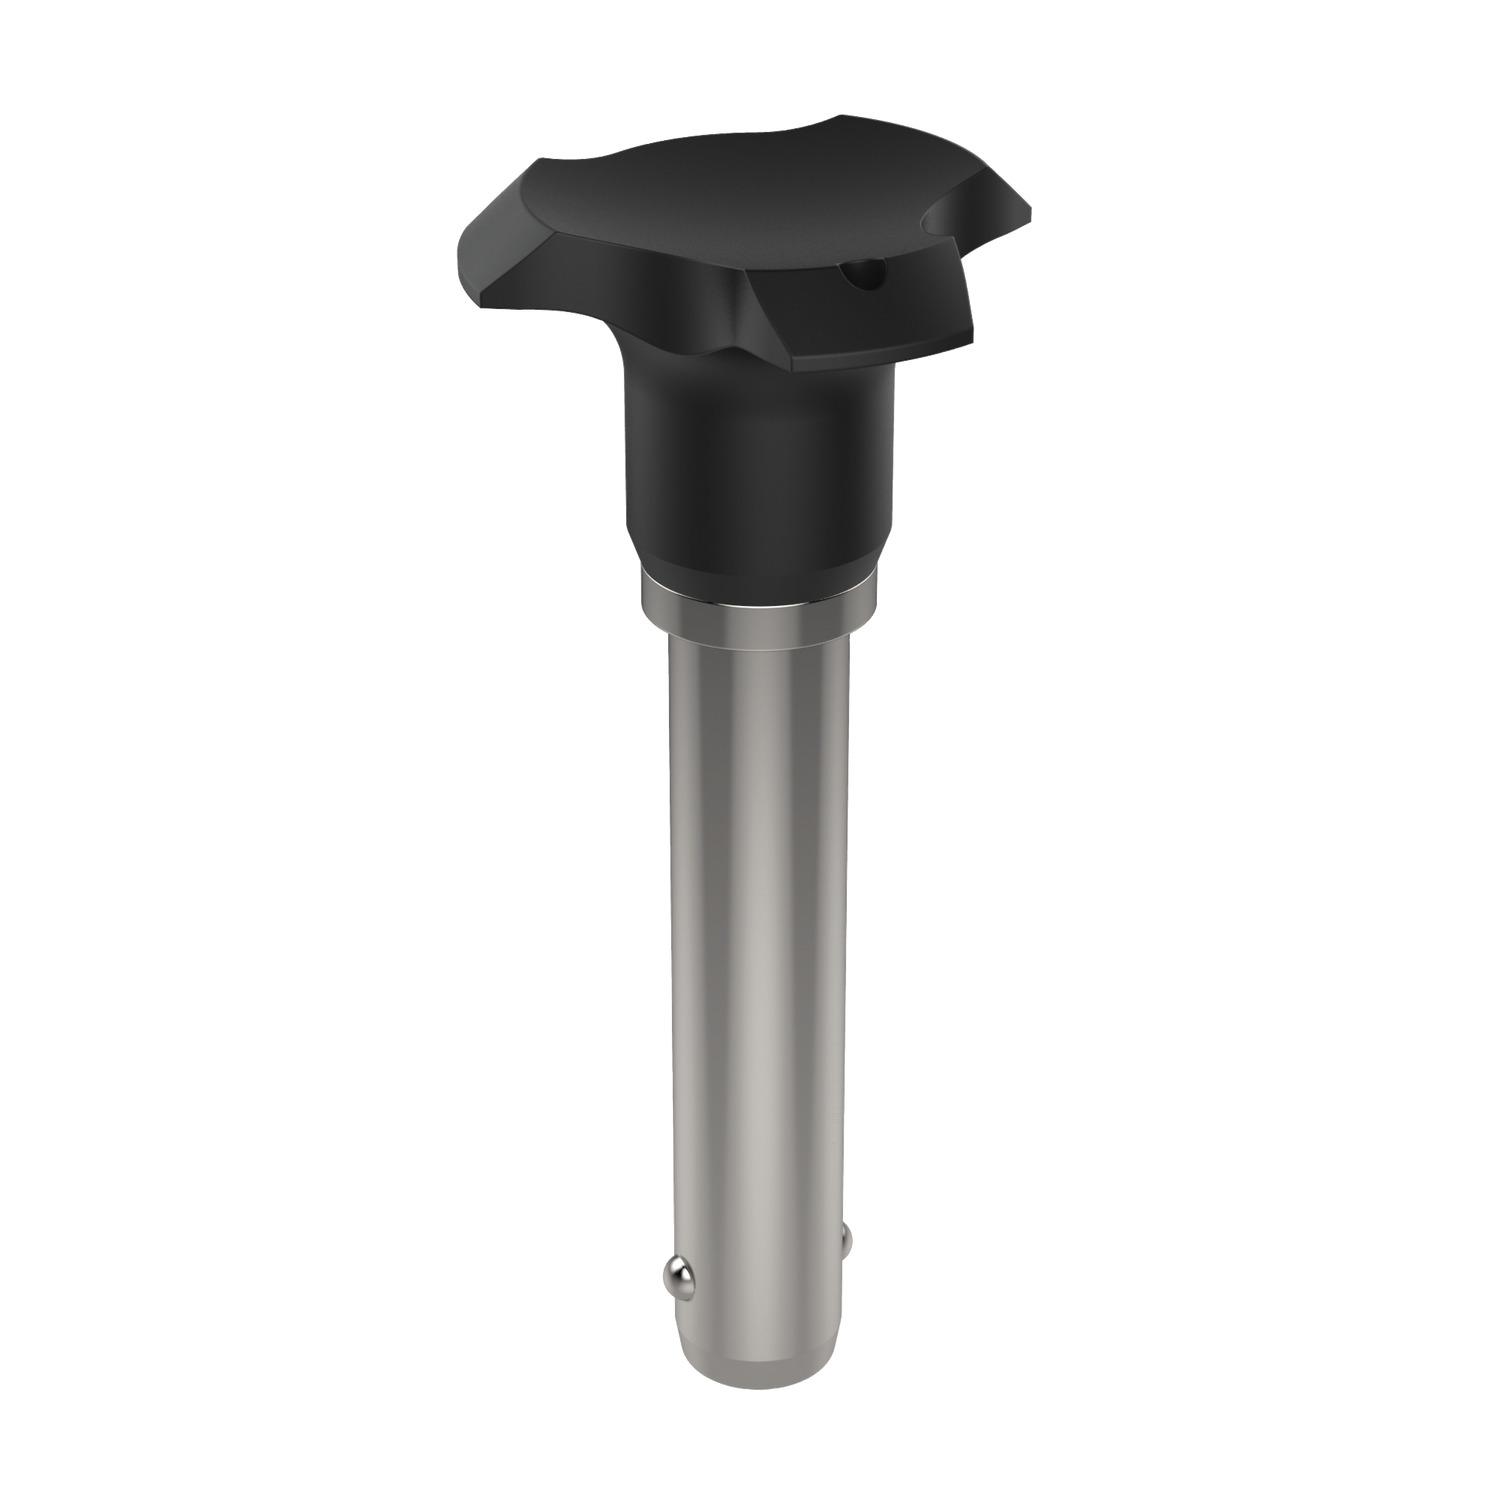 Socket Pins Non-locking socket pin in stainless steel (AISI 303) with thermoplastic handle. Balls are simply spring loaded and do not lock out - therefore these pins are easy and quick to push in/pull out, yet still very secure.